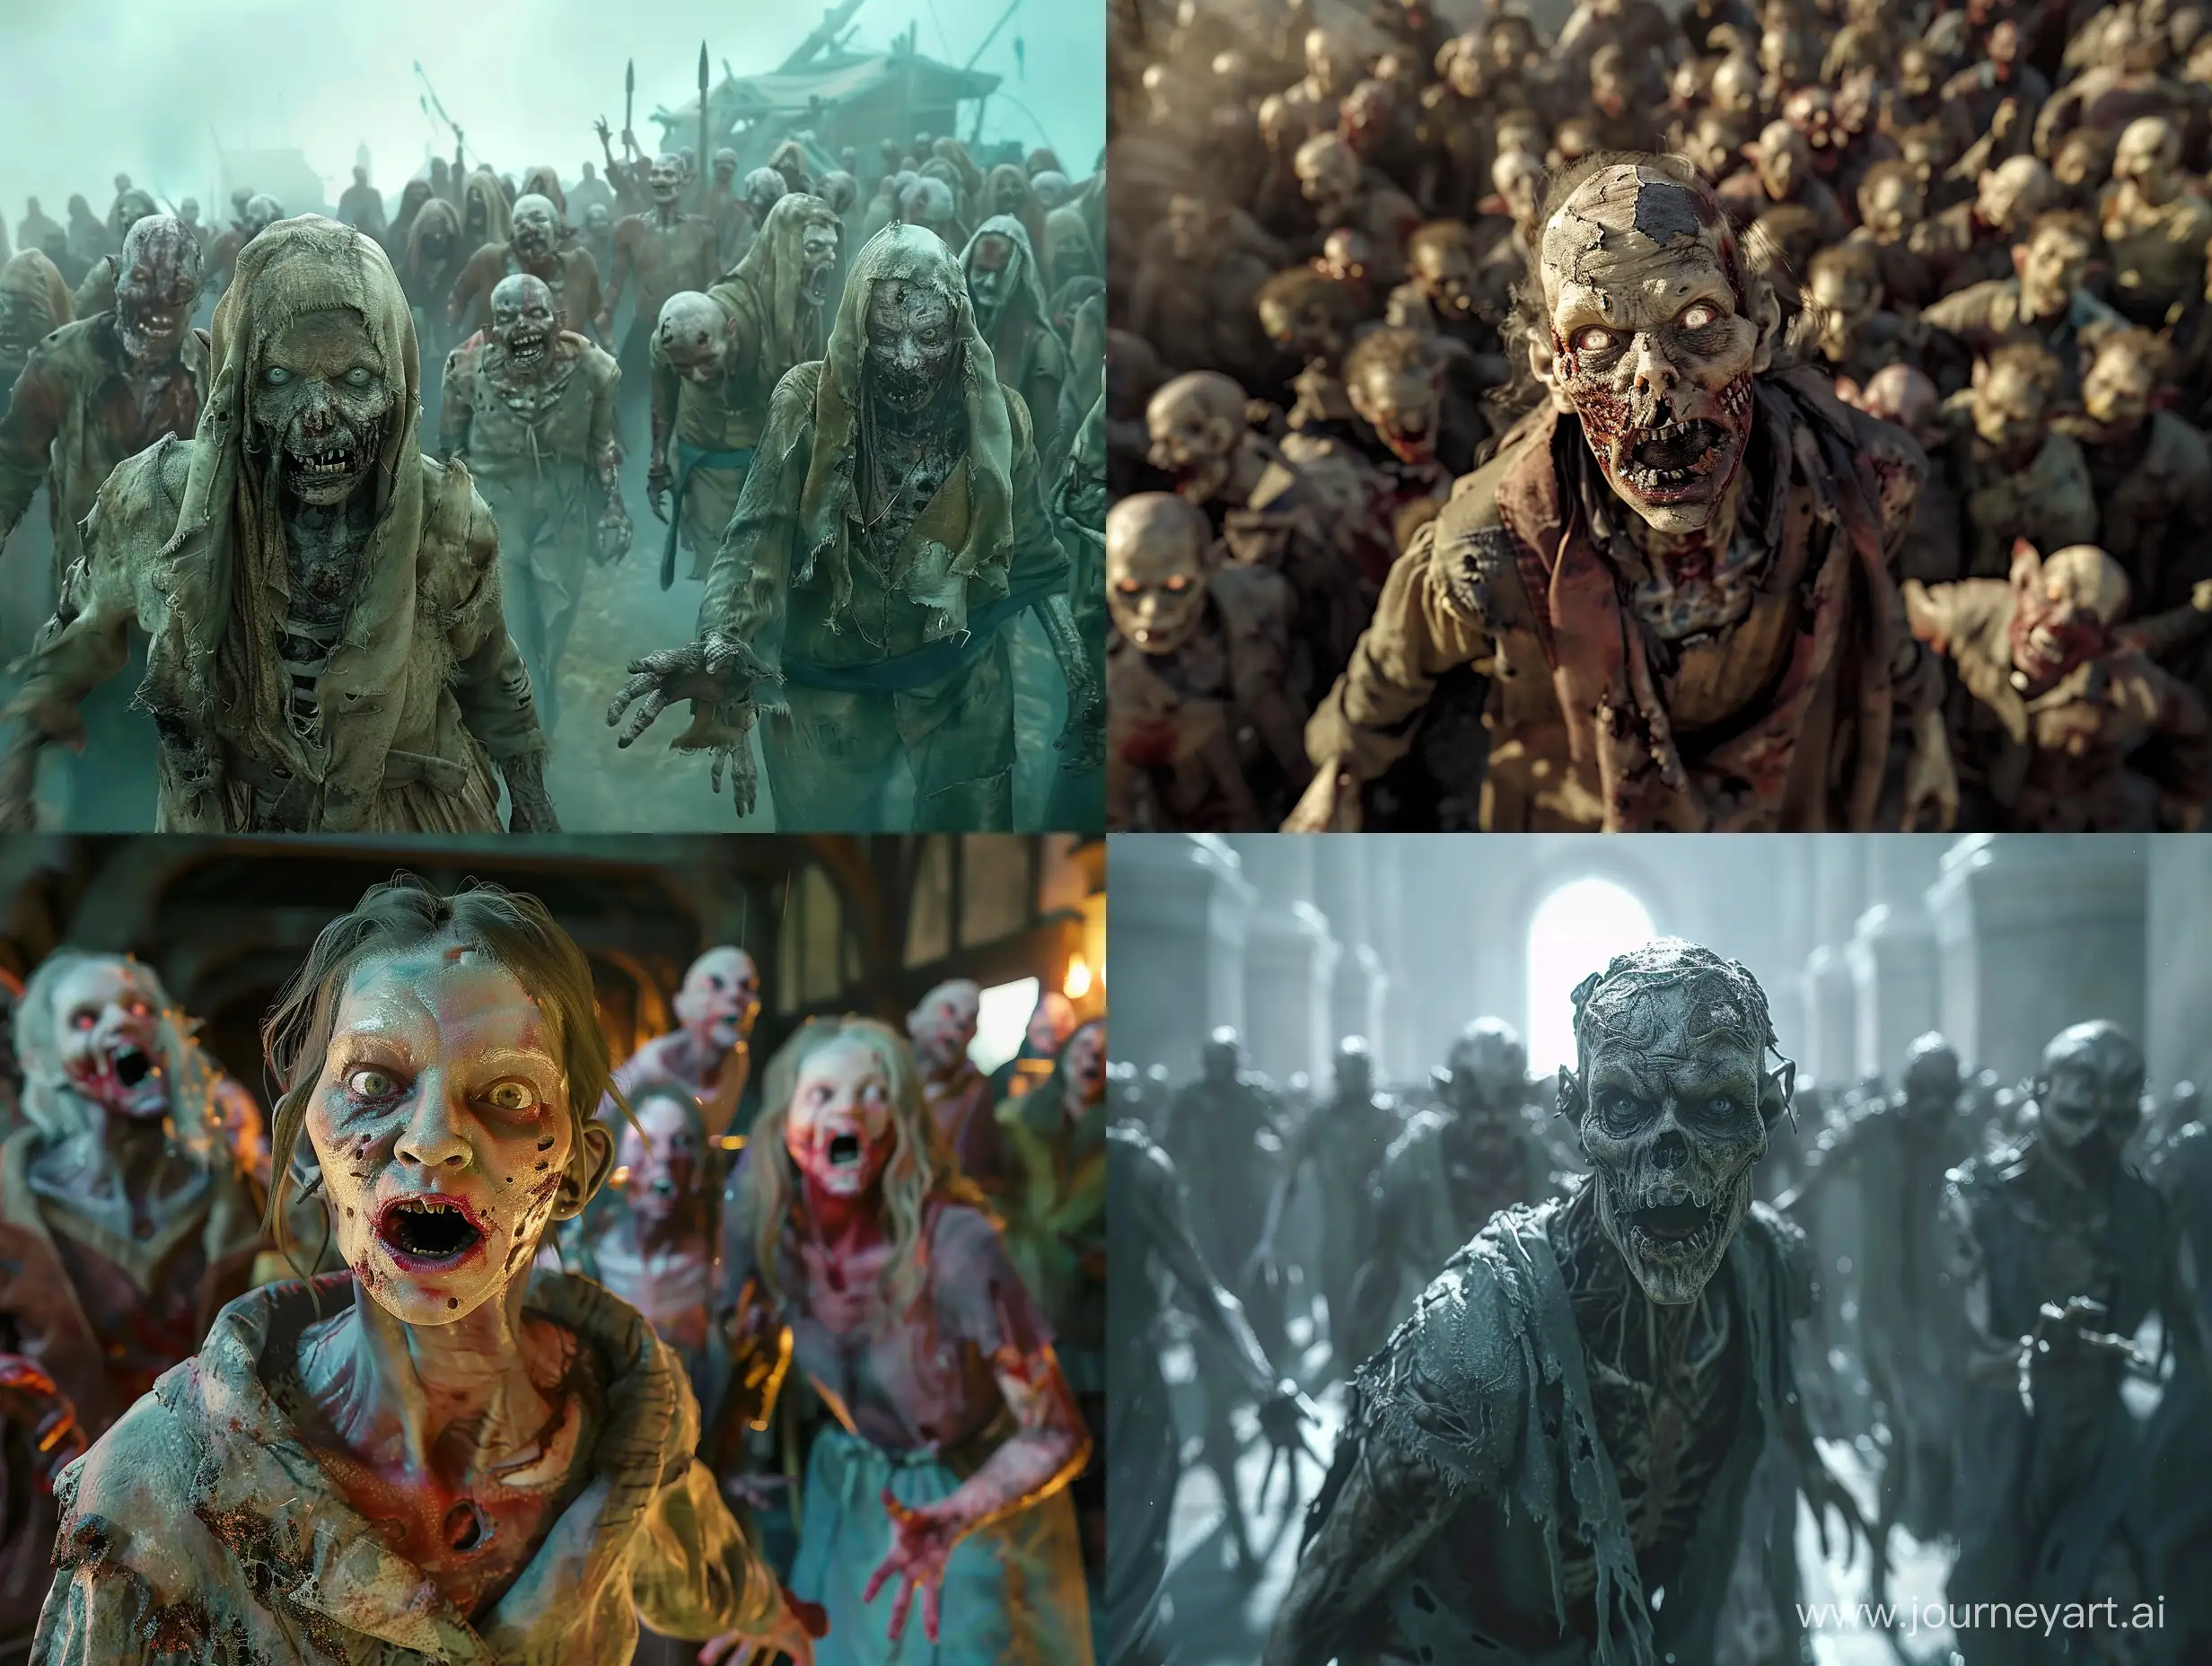 photorealistic cinematic shot, the zombie horde are too many wizards can handle this females